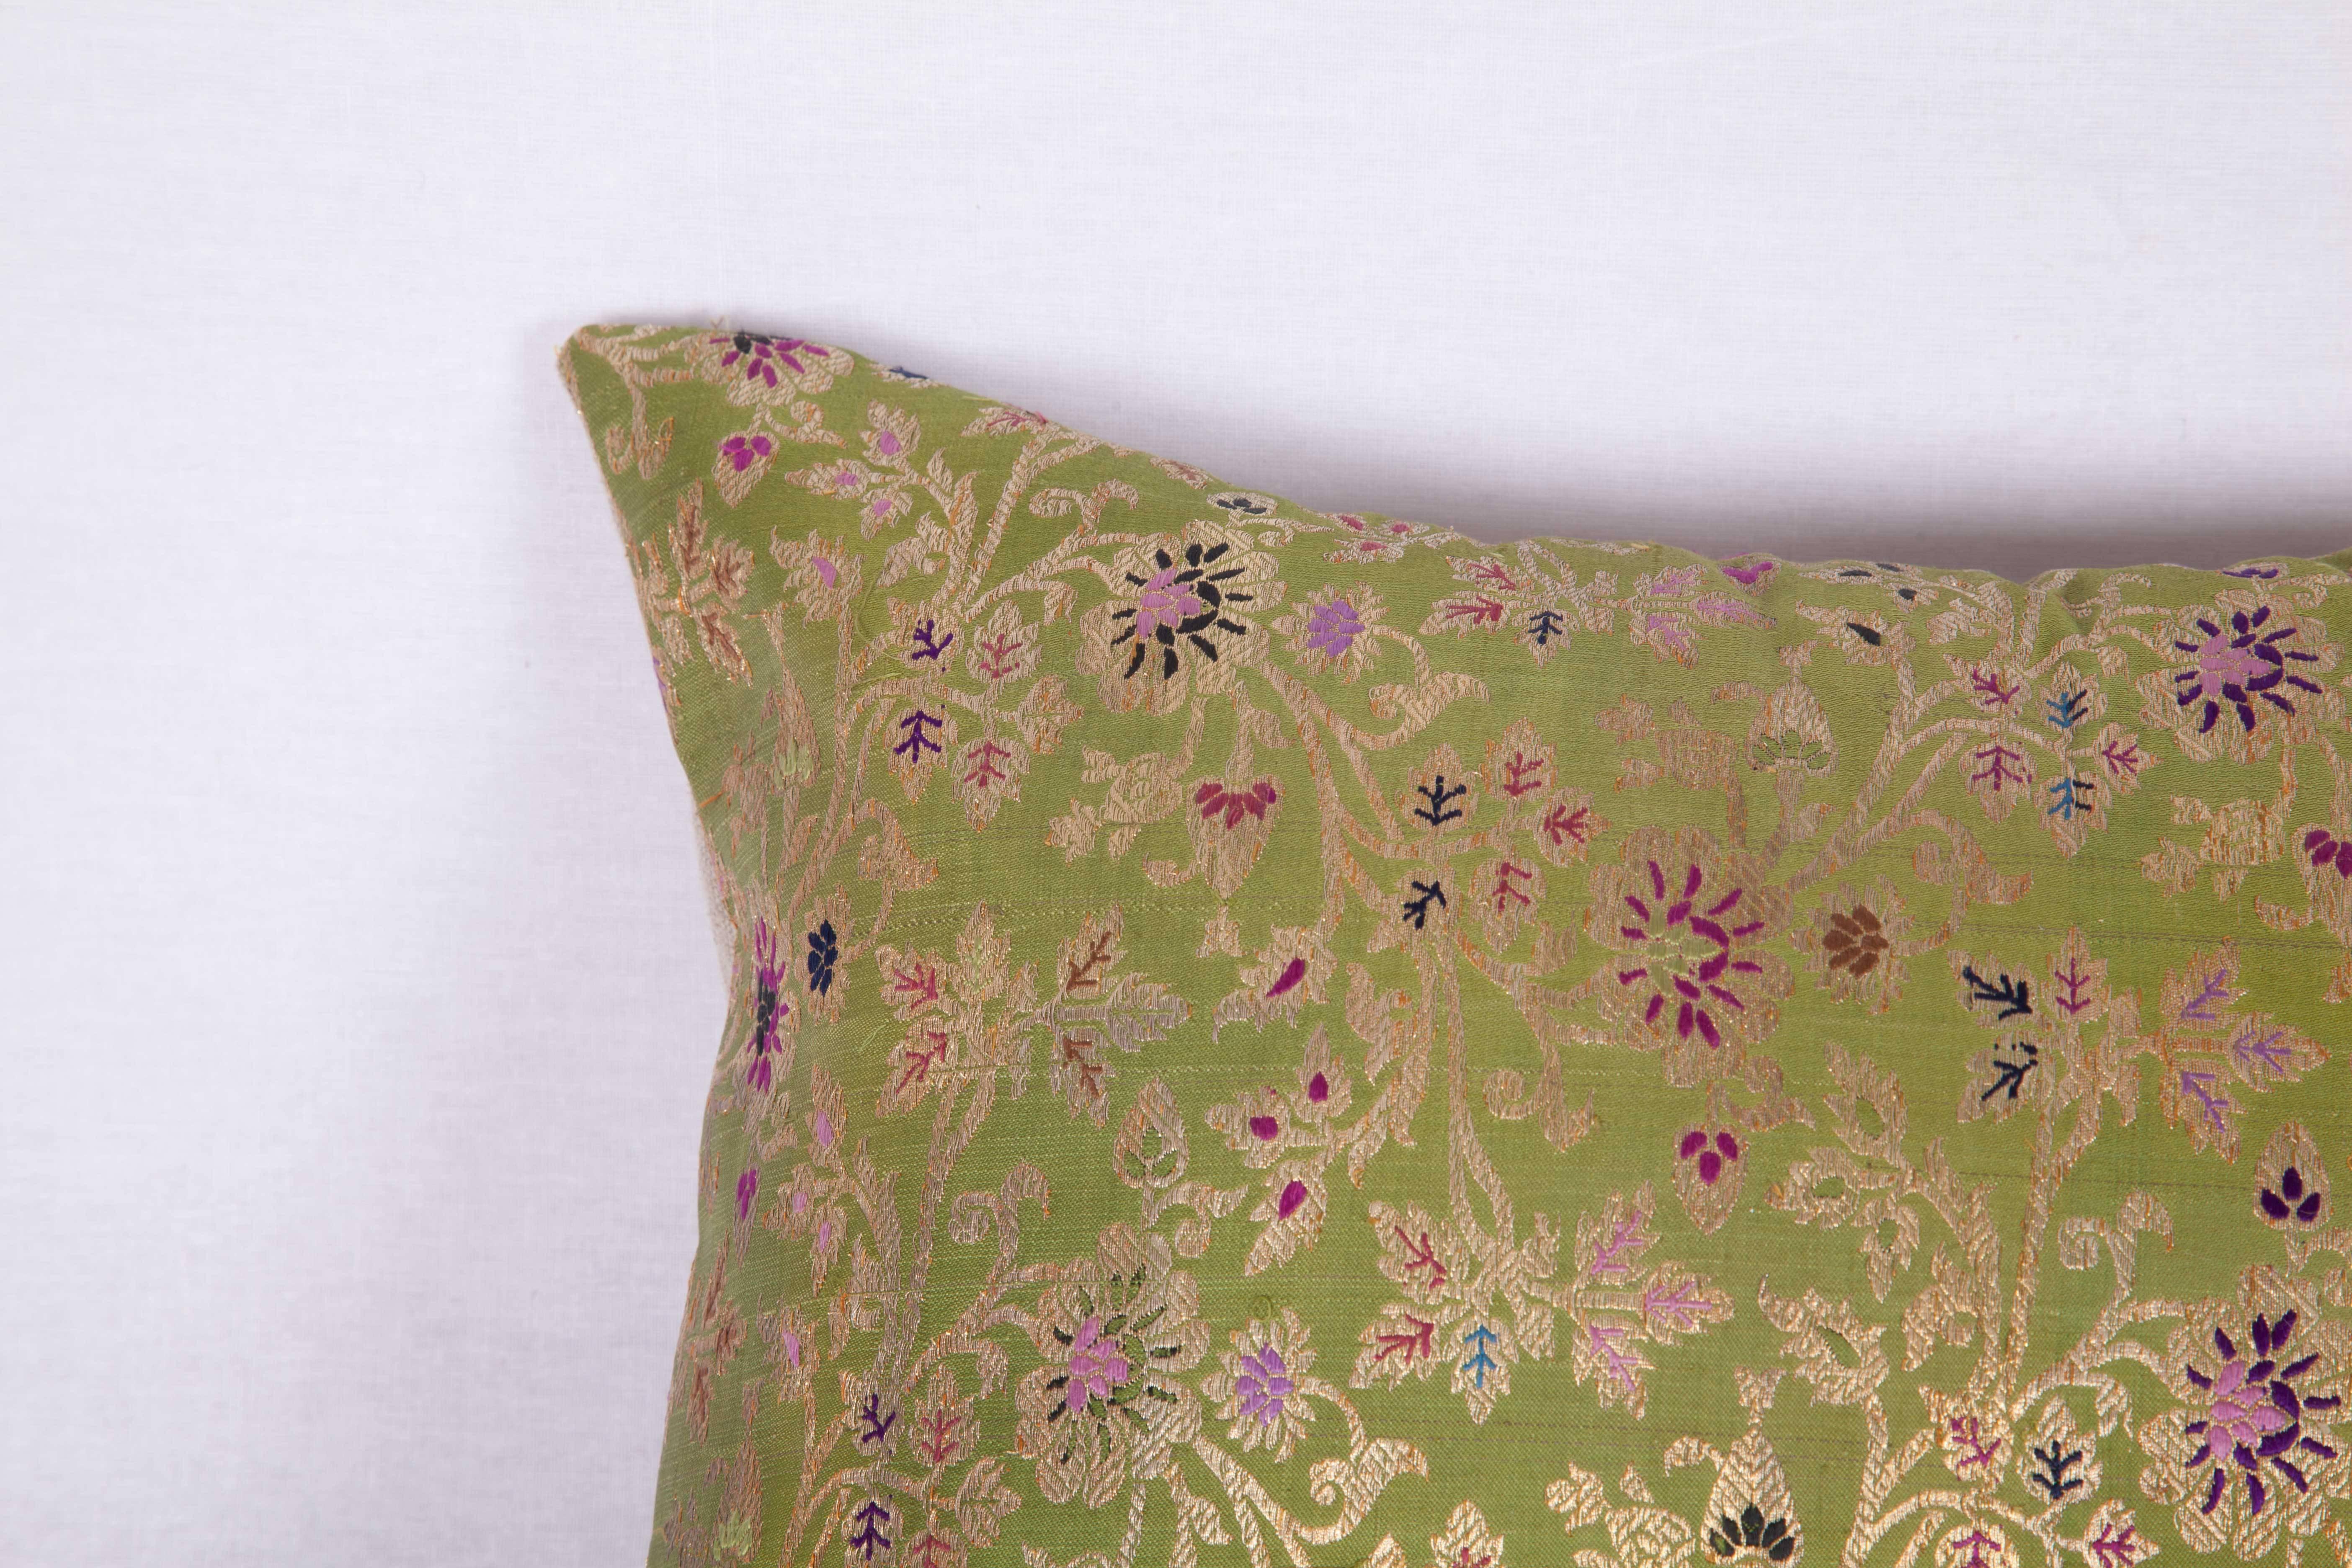 The pillow is made out of mid-19th century, Persian brocade. It does not come with an insert but it comes with a bag made to the size and out of cotton to accommodate the filling. The backing is made of linen. Please note 'filling is not provided'.